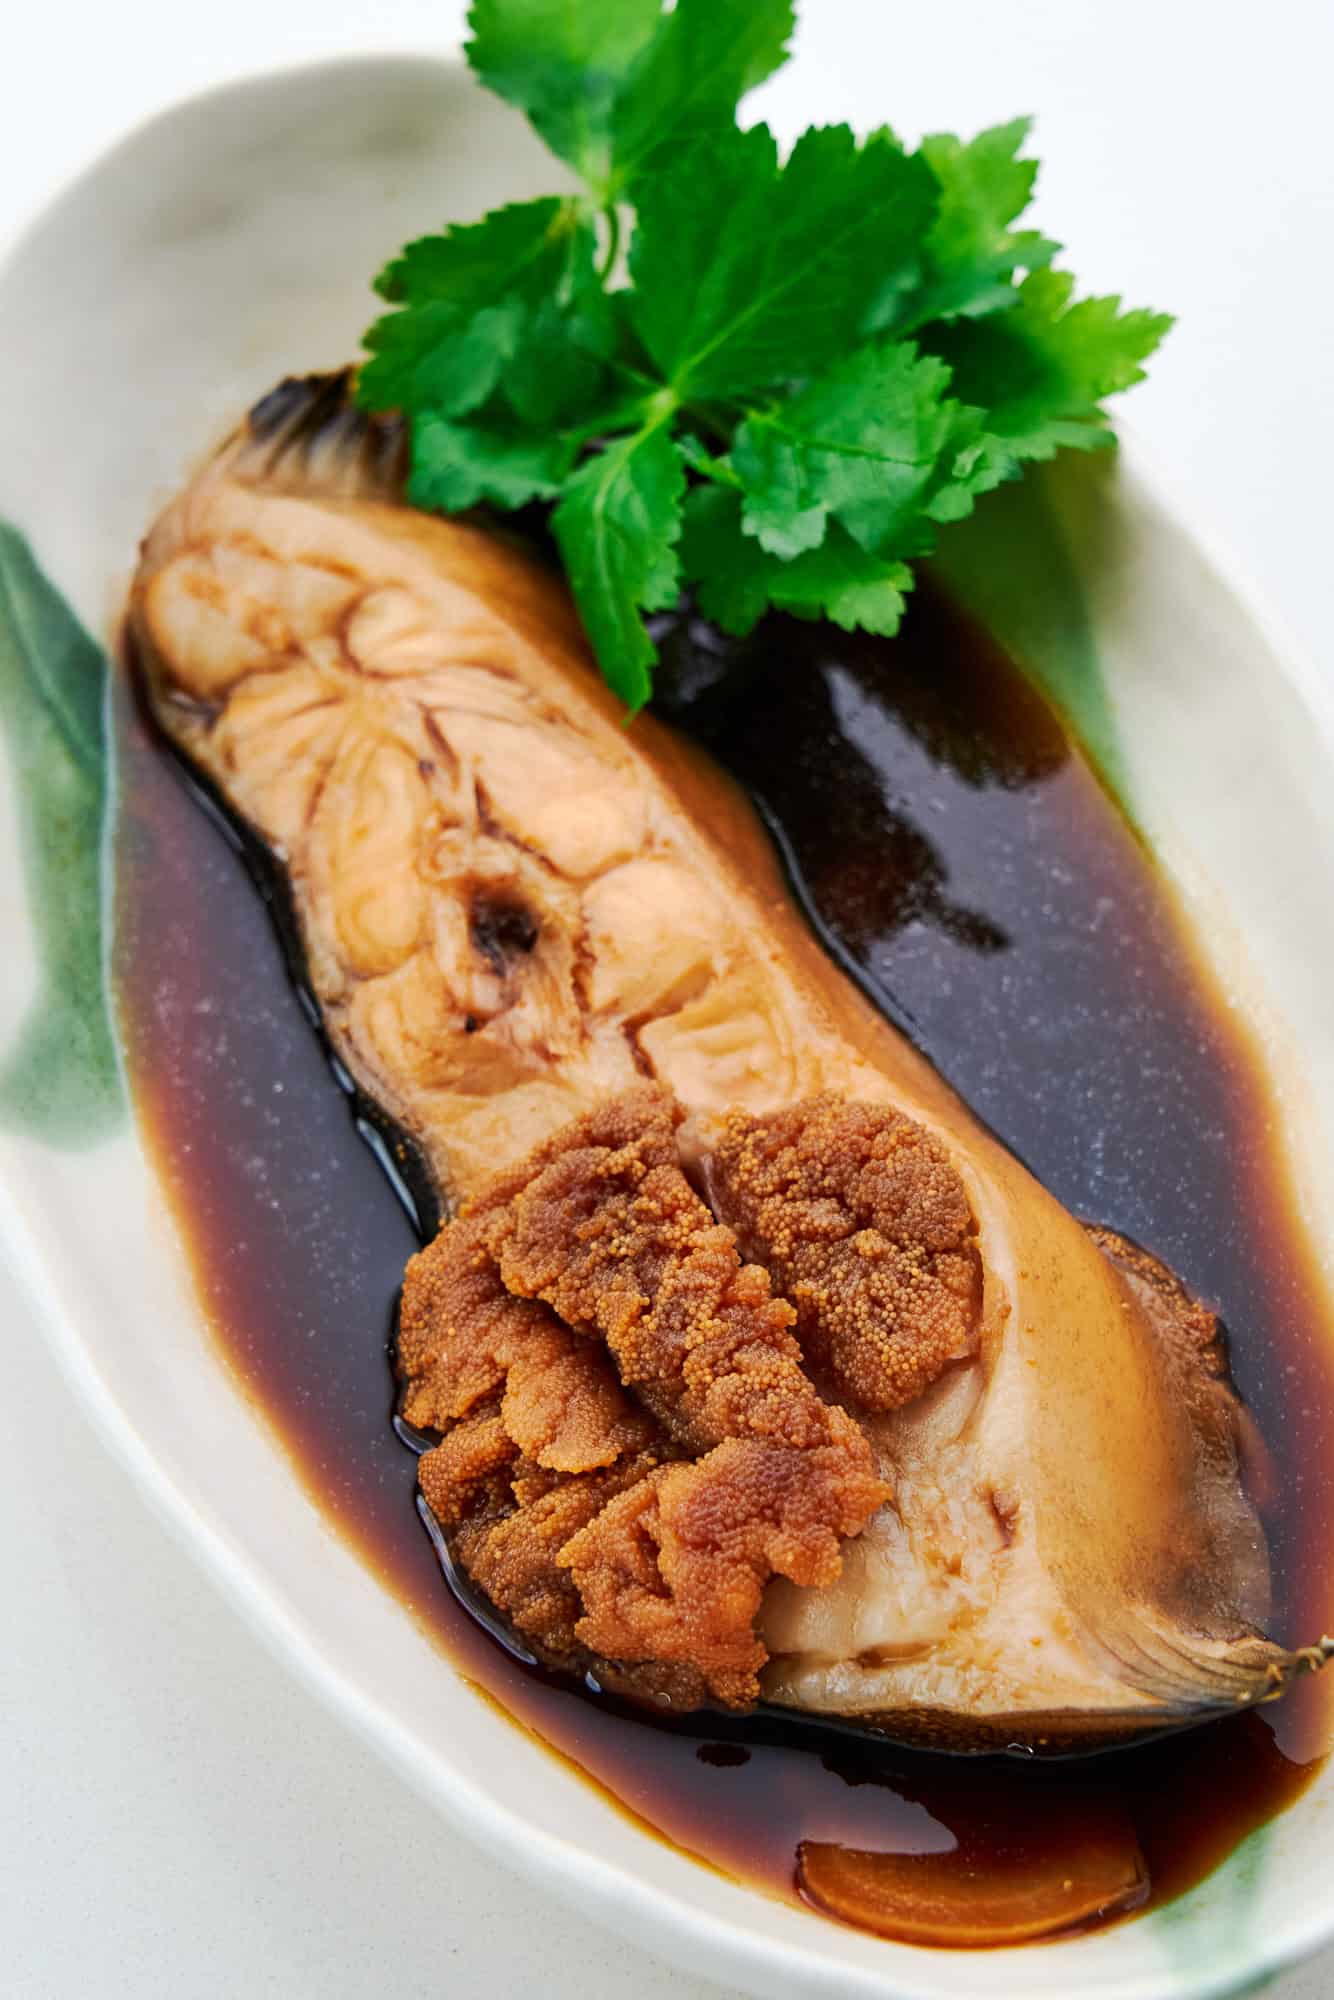 Soy sauce and ginger flounder from above.